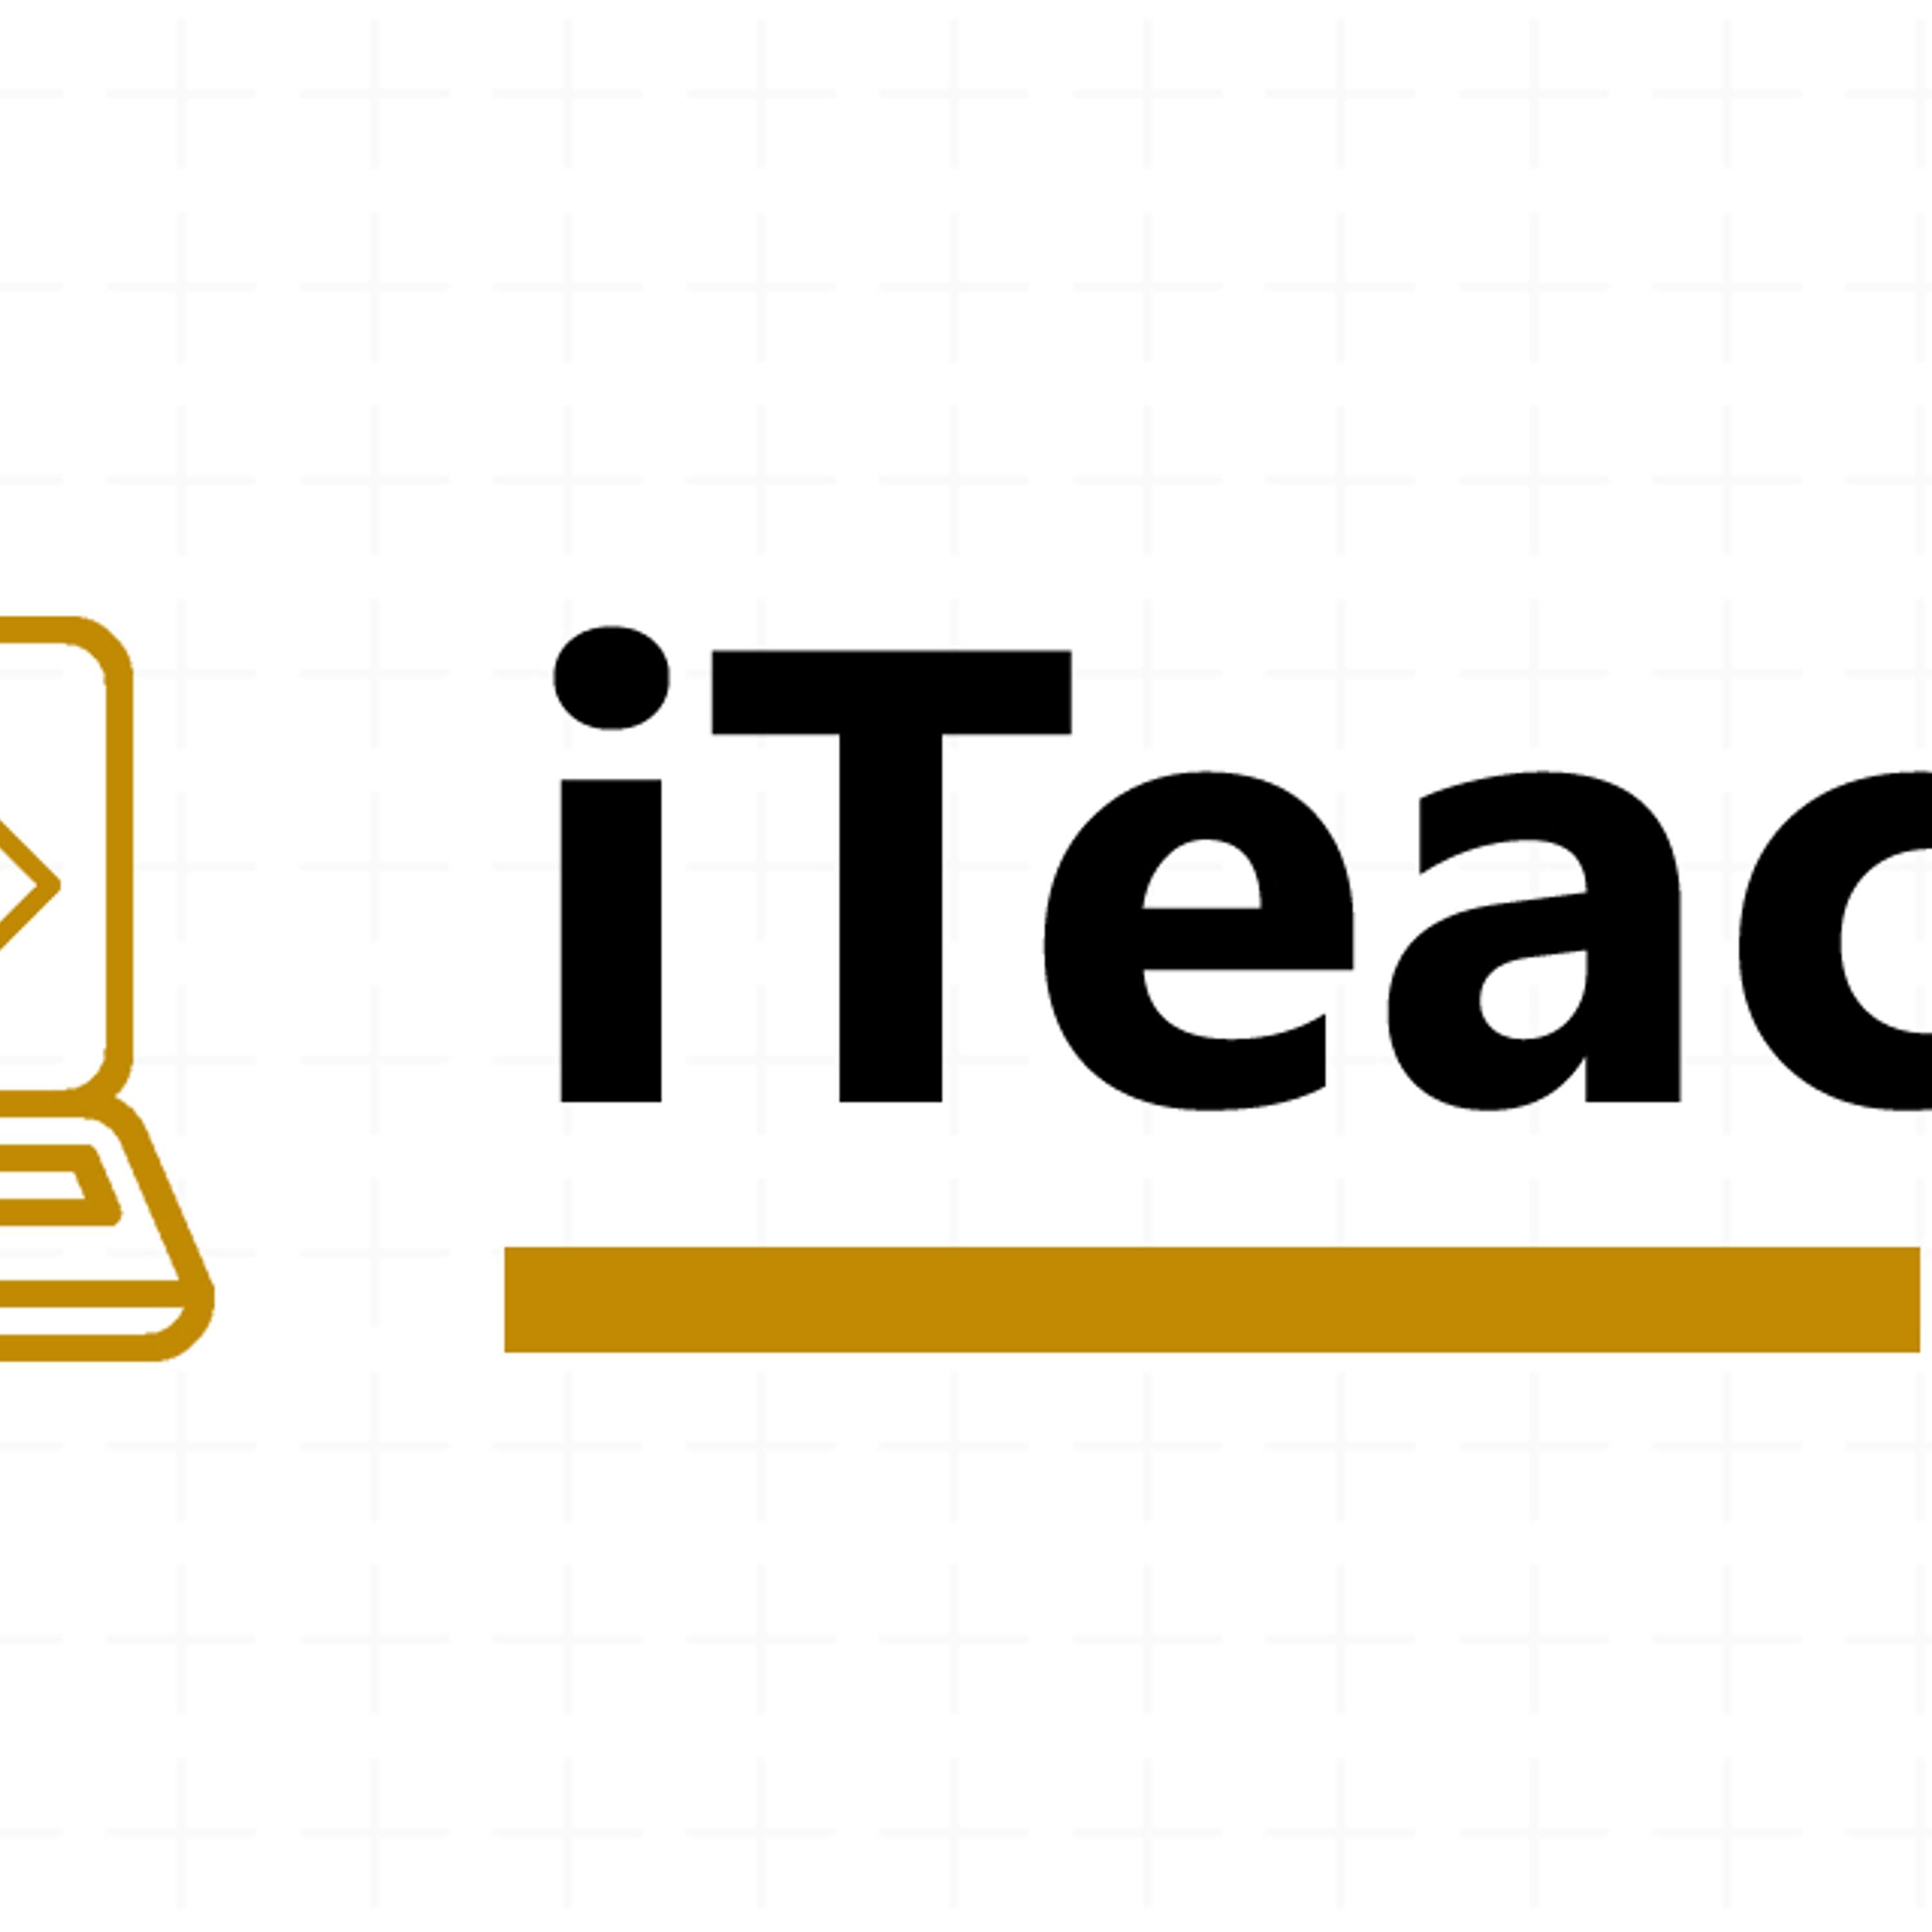 ITeach — the Eco-responsible Programming Learning Platform